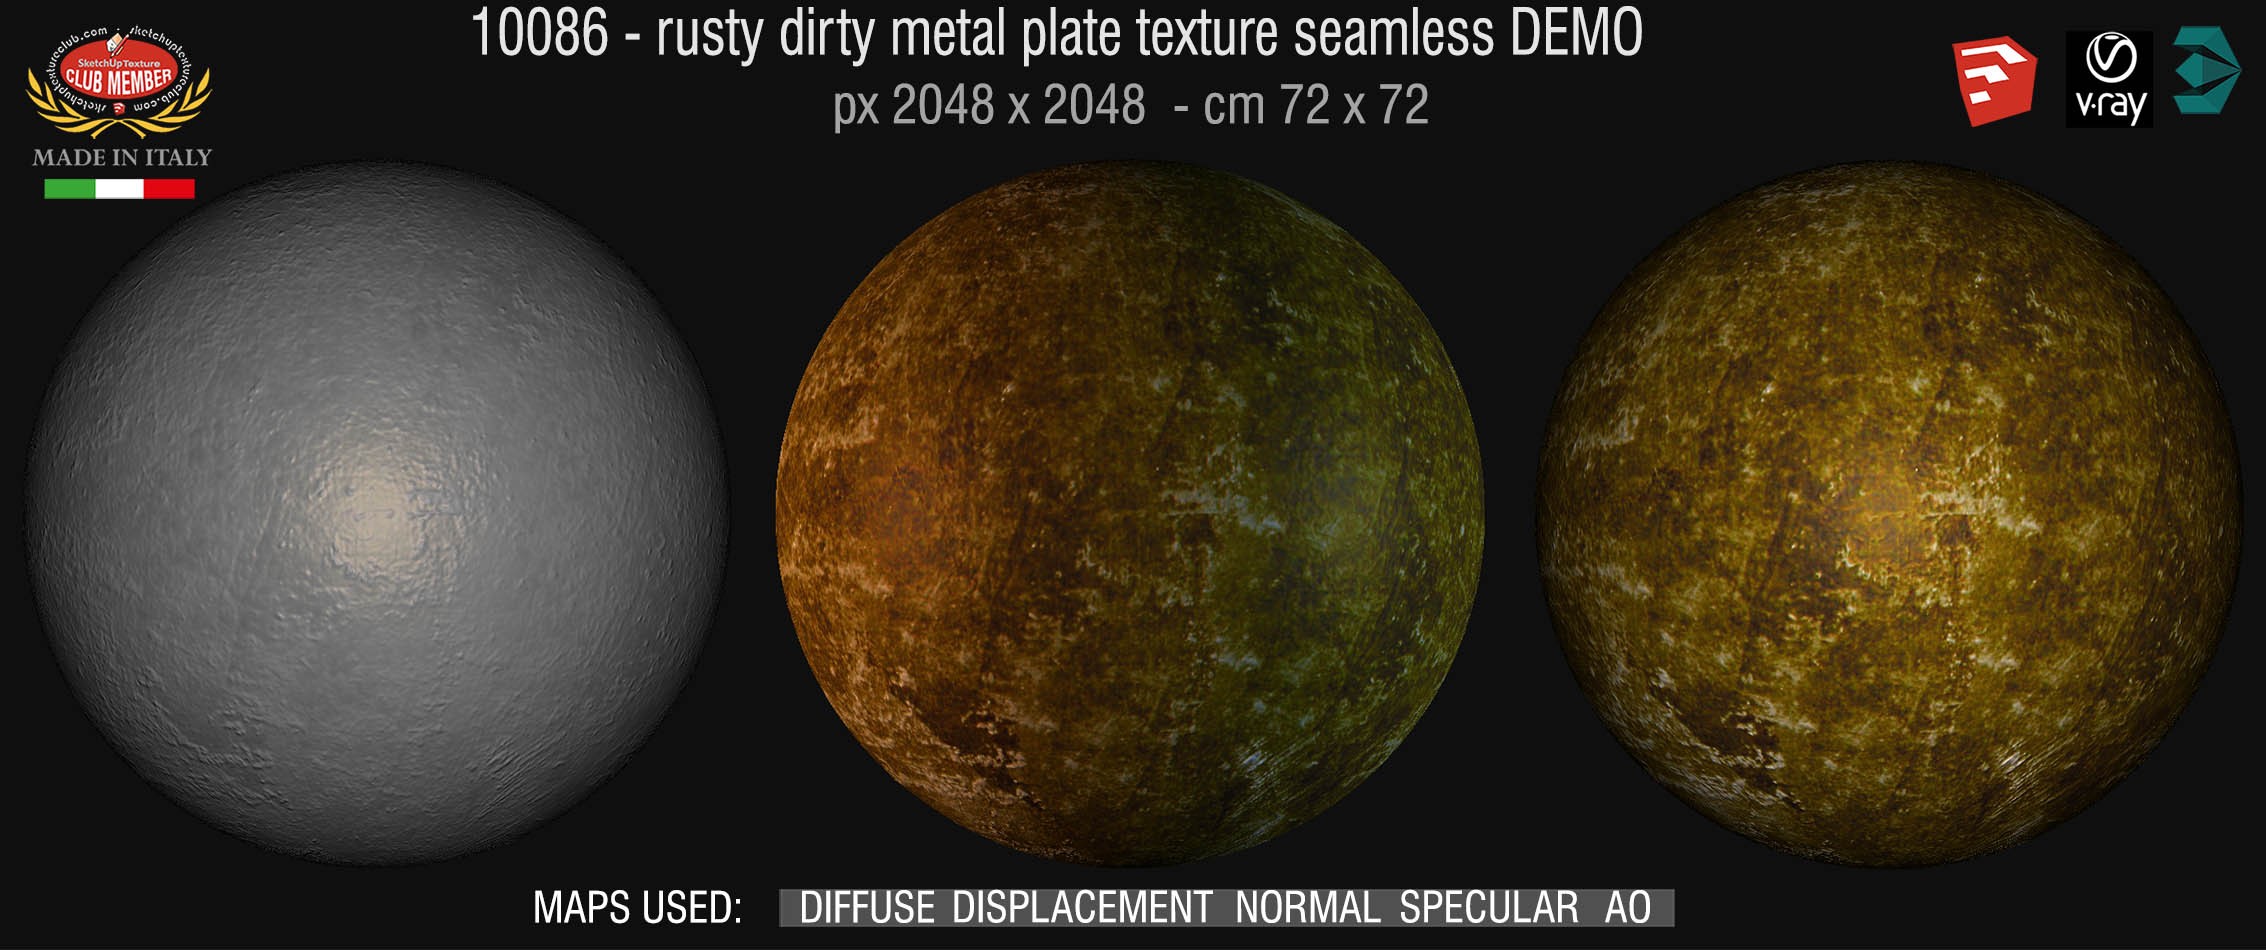 10086 HR Old dirty metal texture seamless + maps DEMO